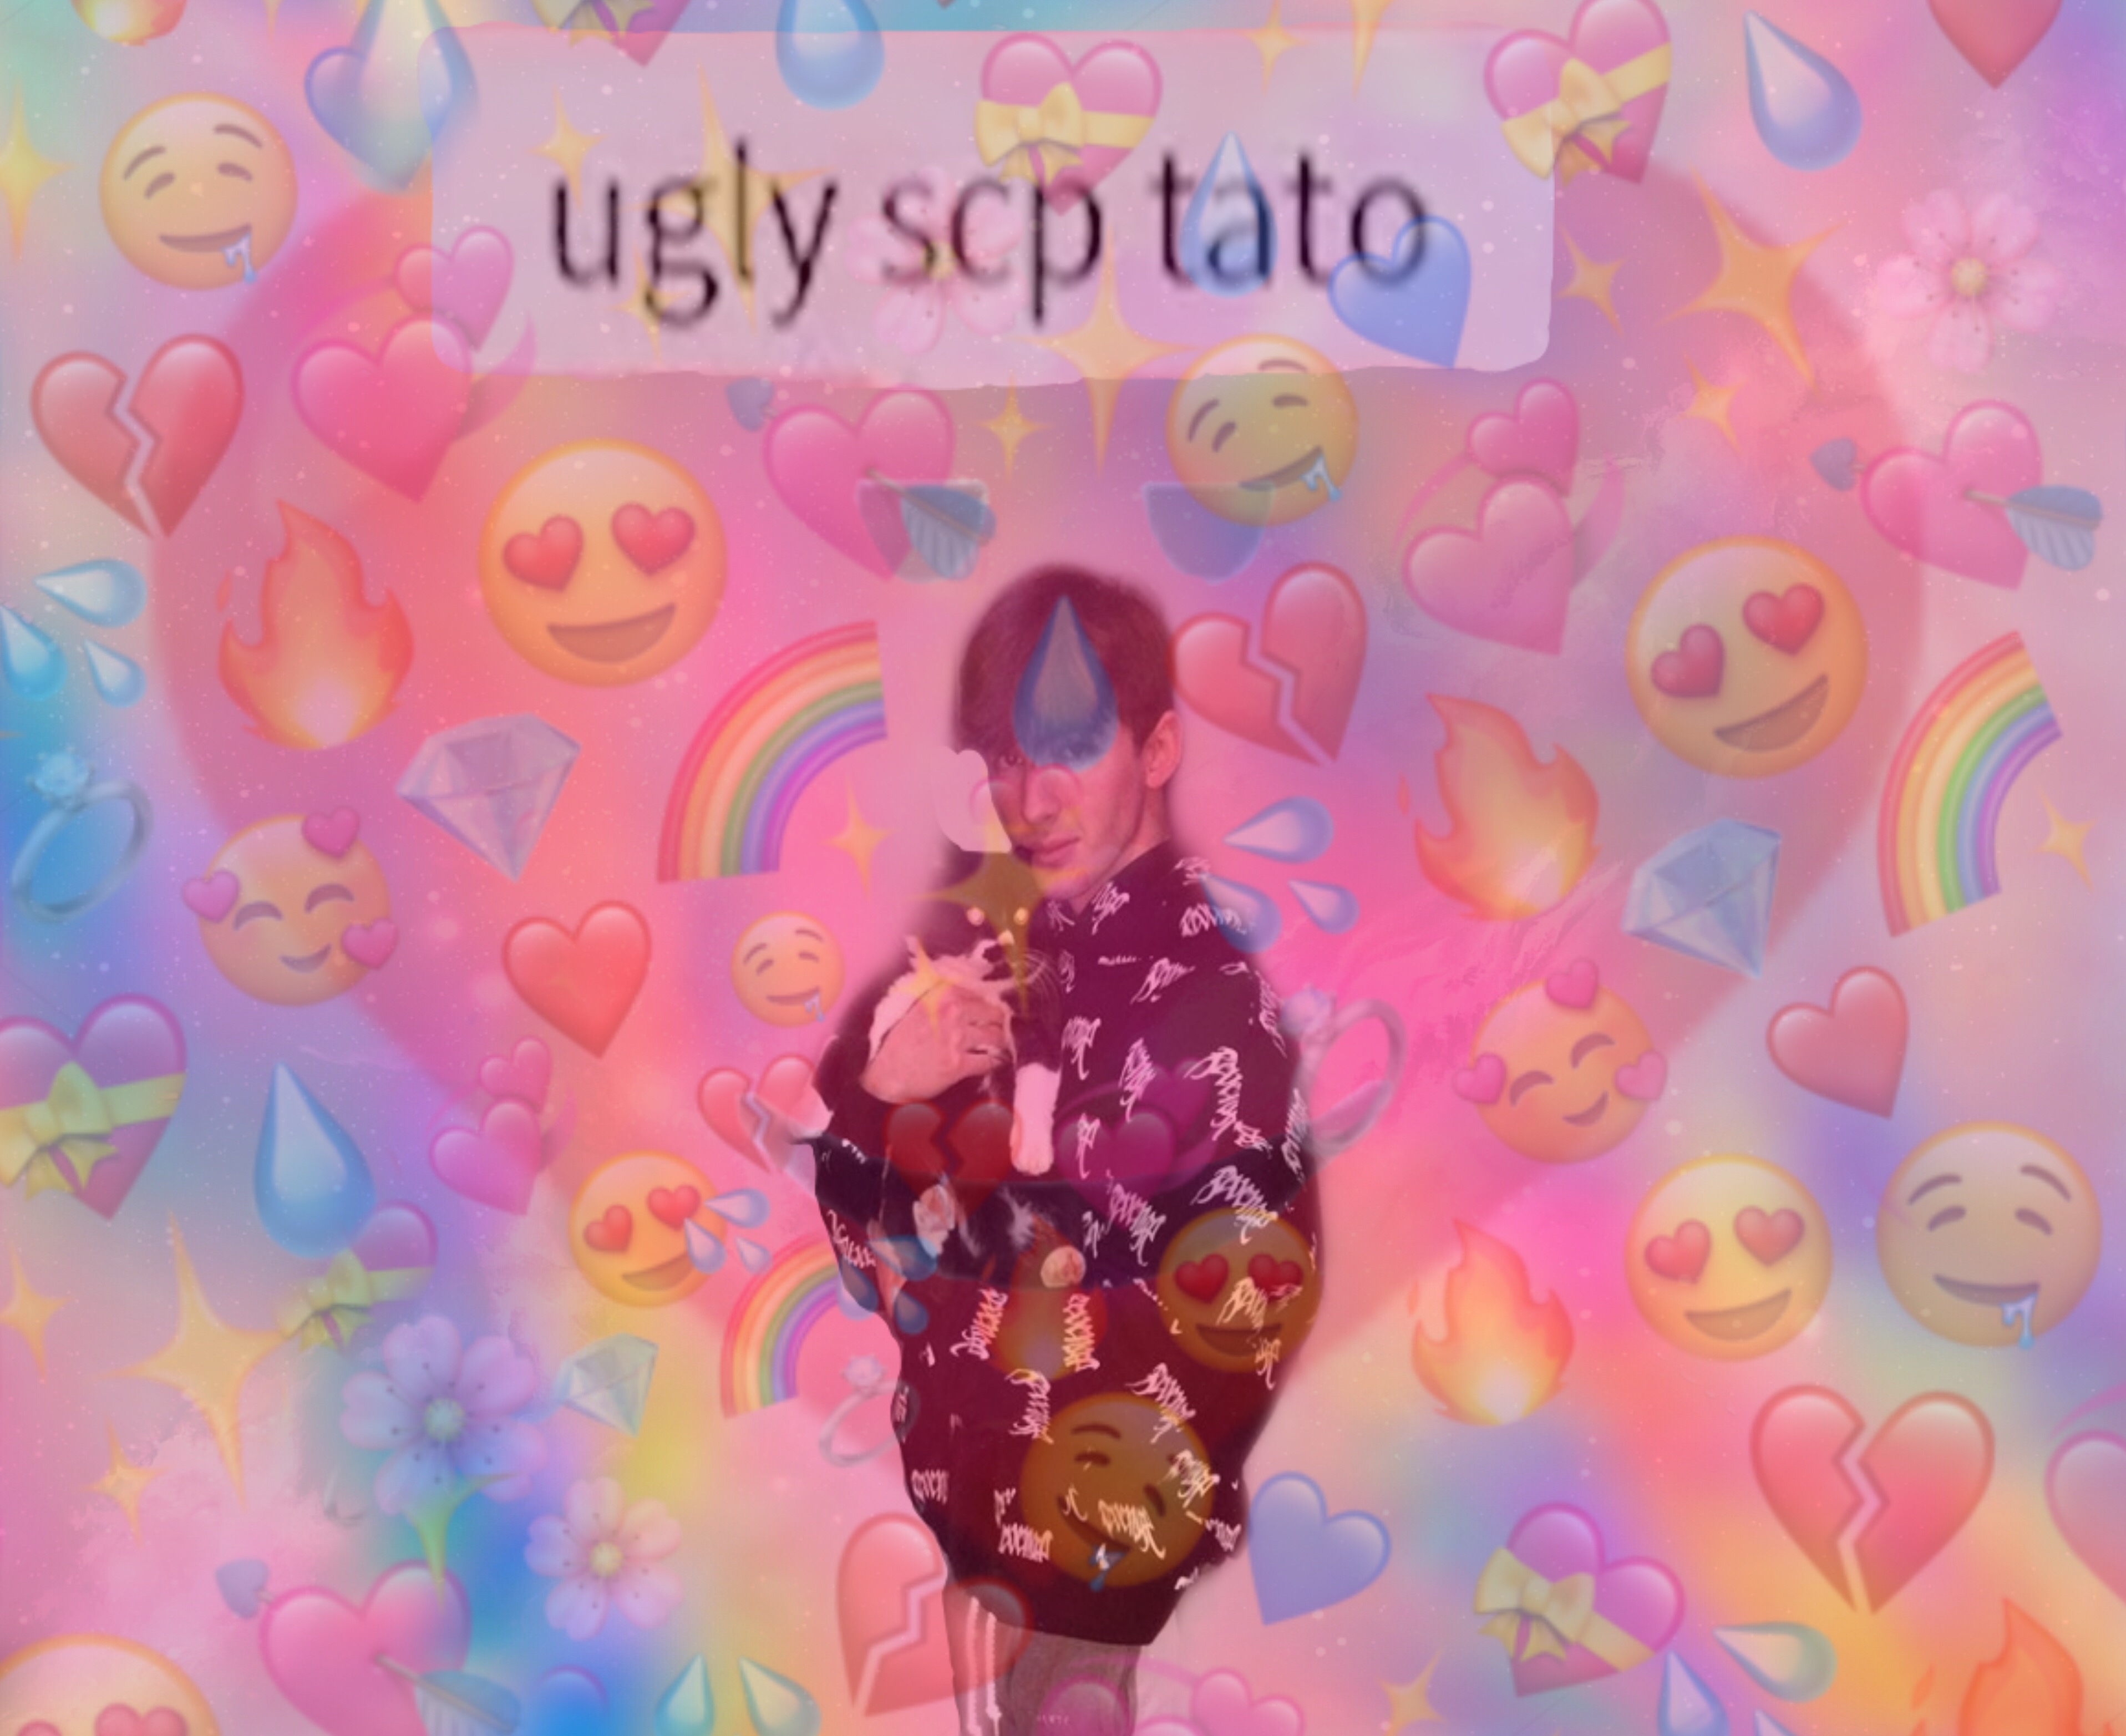 Freetoedit Flamingo Roblox Youtuber Image By Scp Tato